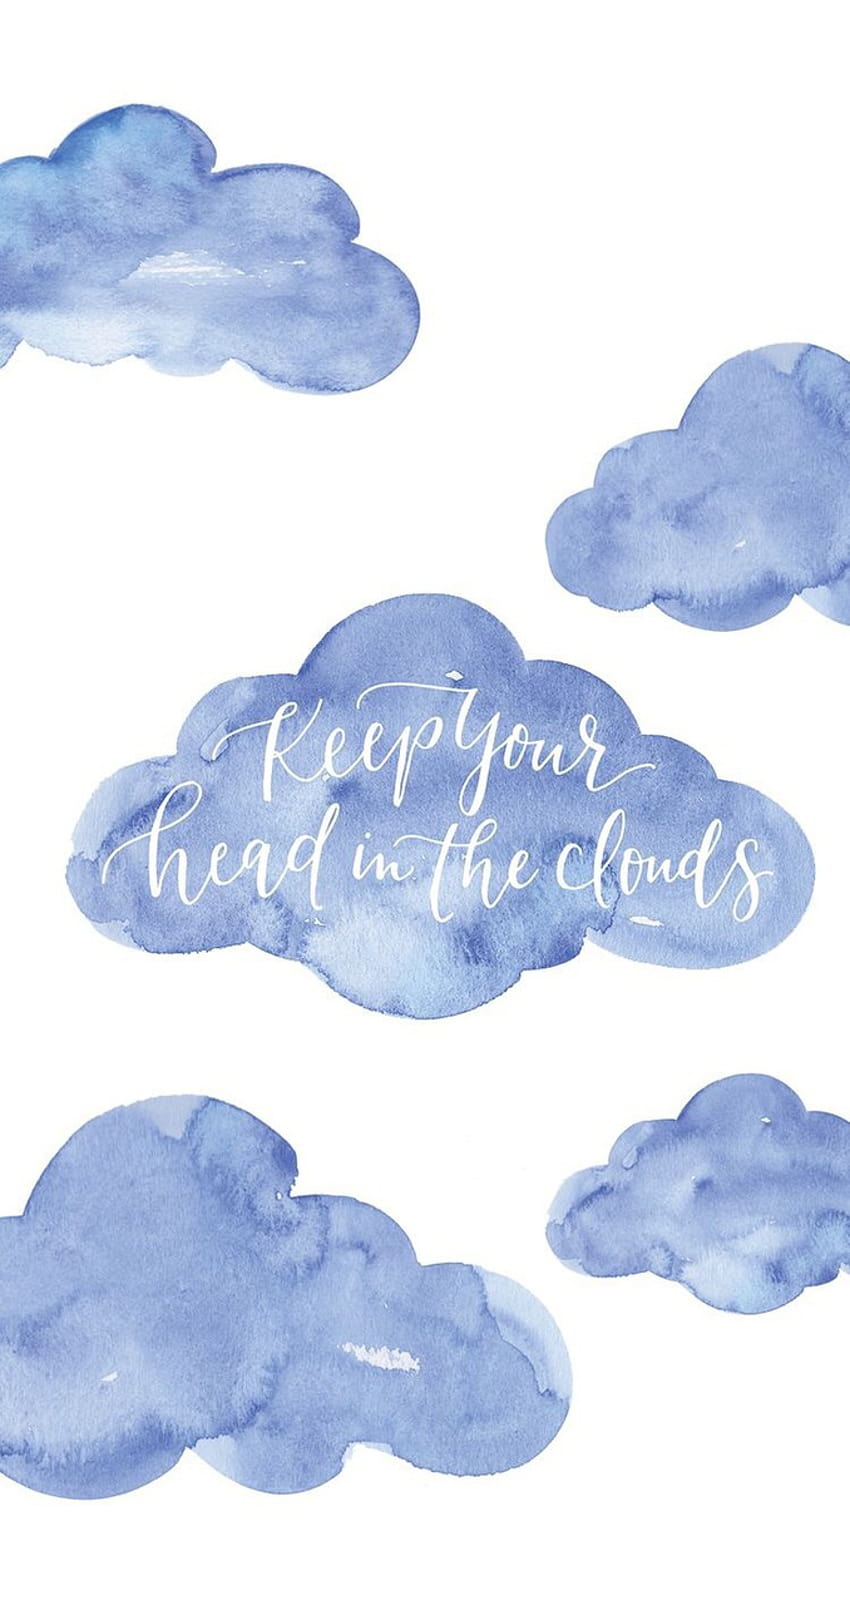 about quotes in backgrounds by Fabiola Pastén Henry, head in the clouds HD phone wallpaper